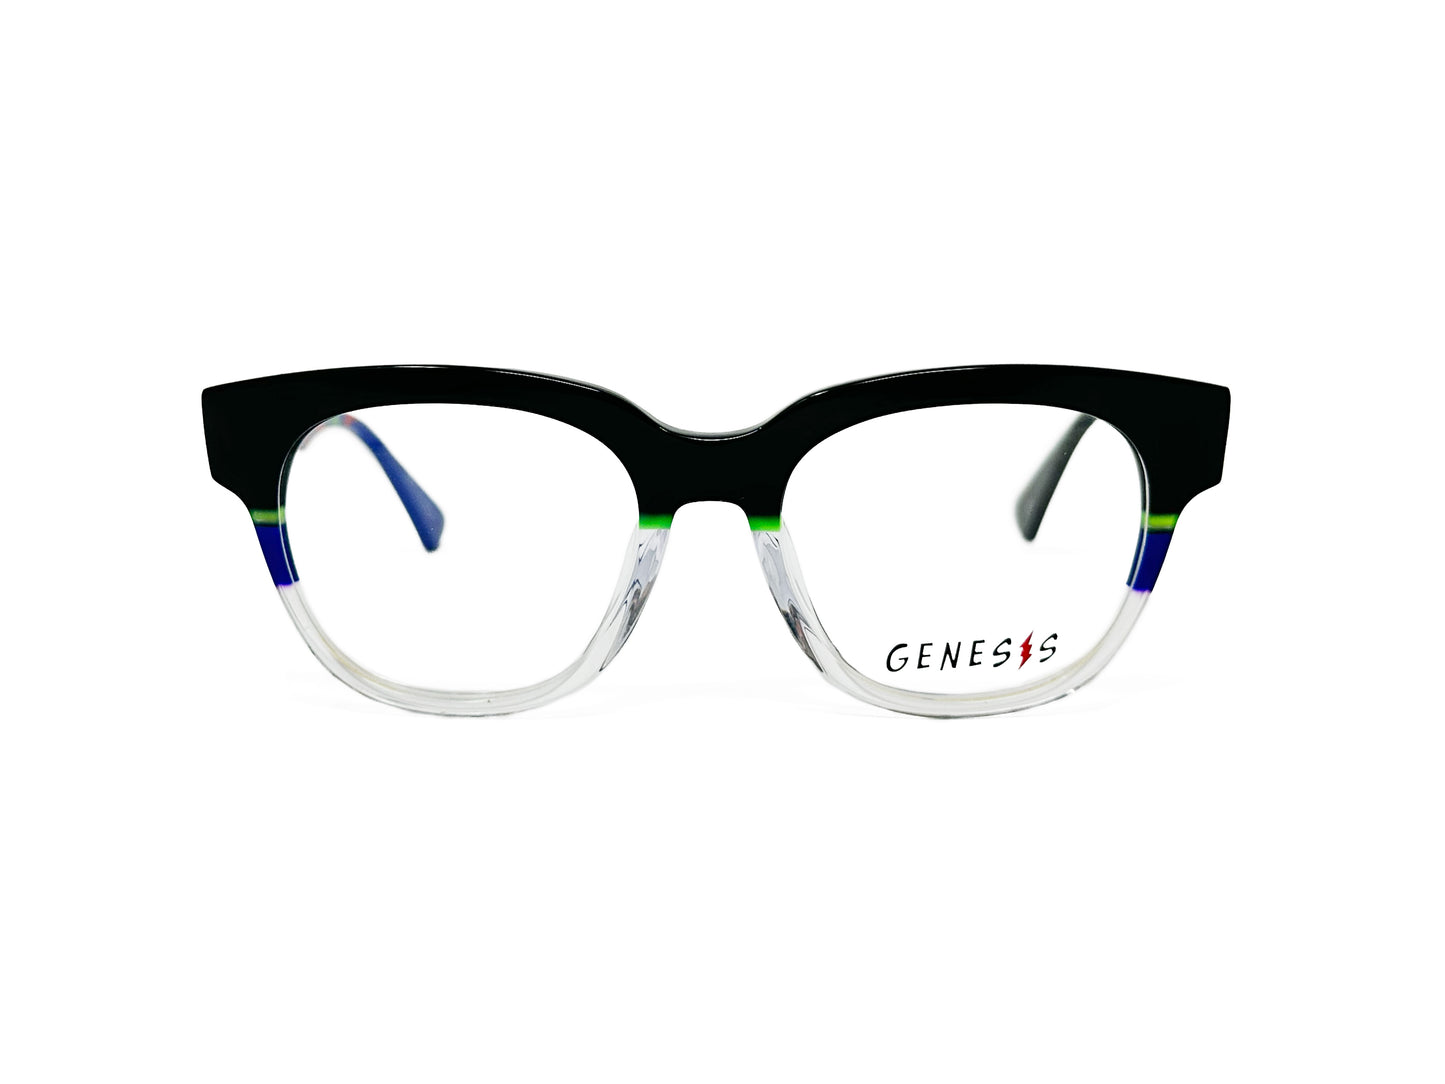 Genesis rounded-square, acetate optical frame. Model: GV1525. Color: Black top with neon green and blue stipe to clear transparent bottom. Front view. 